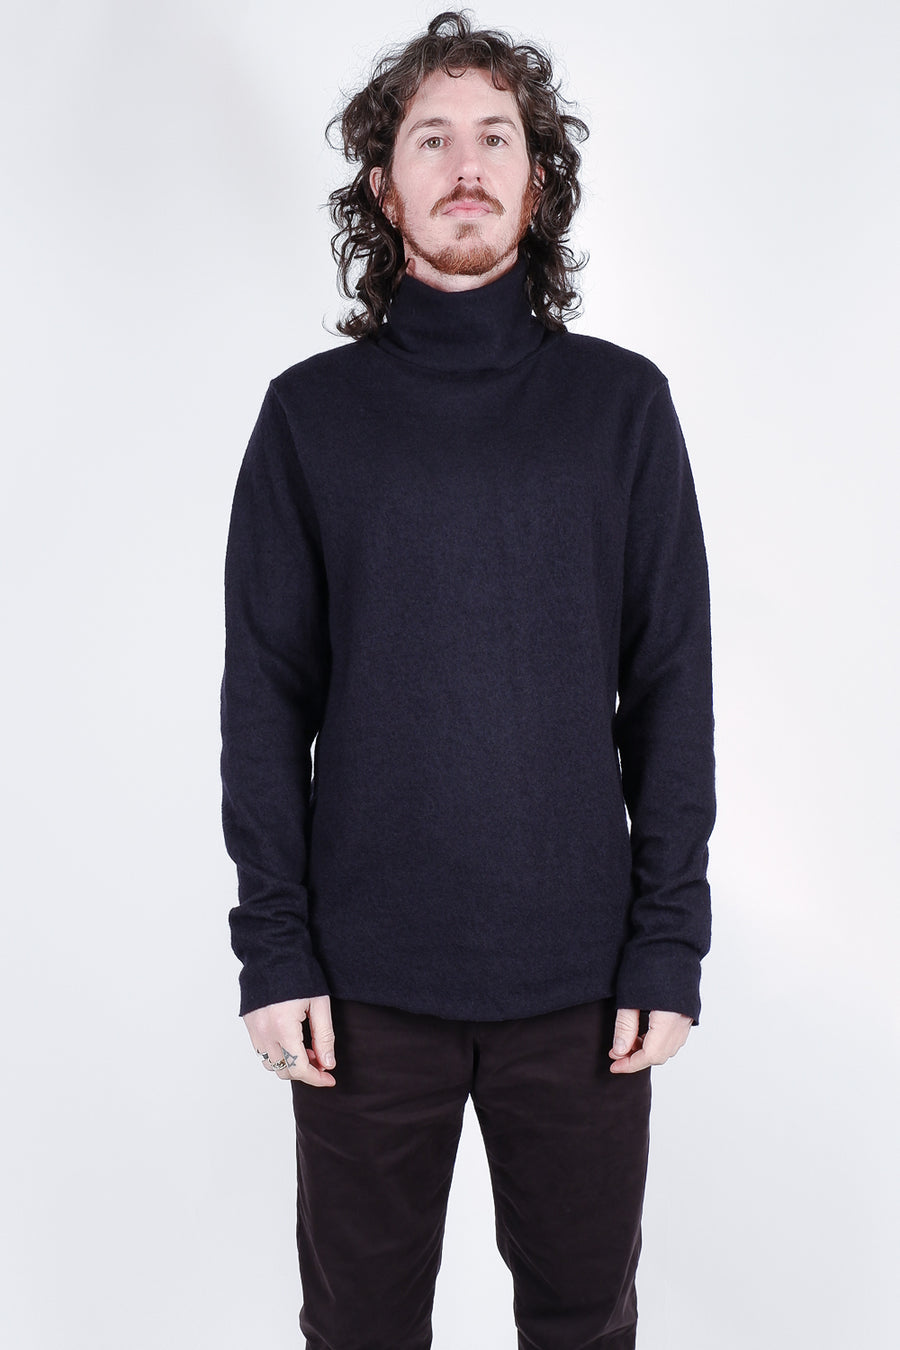 Buy the Hannes Roether Boiled Wool Roll Neck Knit Navy at Intro. Spend £50 for free UK delivery. Official stockists. We ship worldwide.